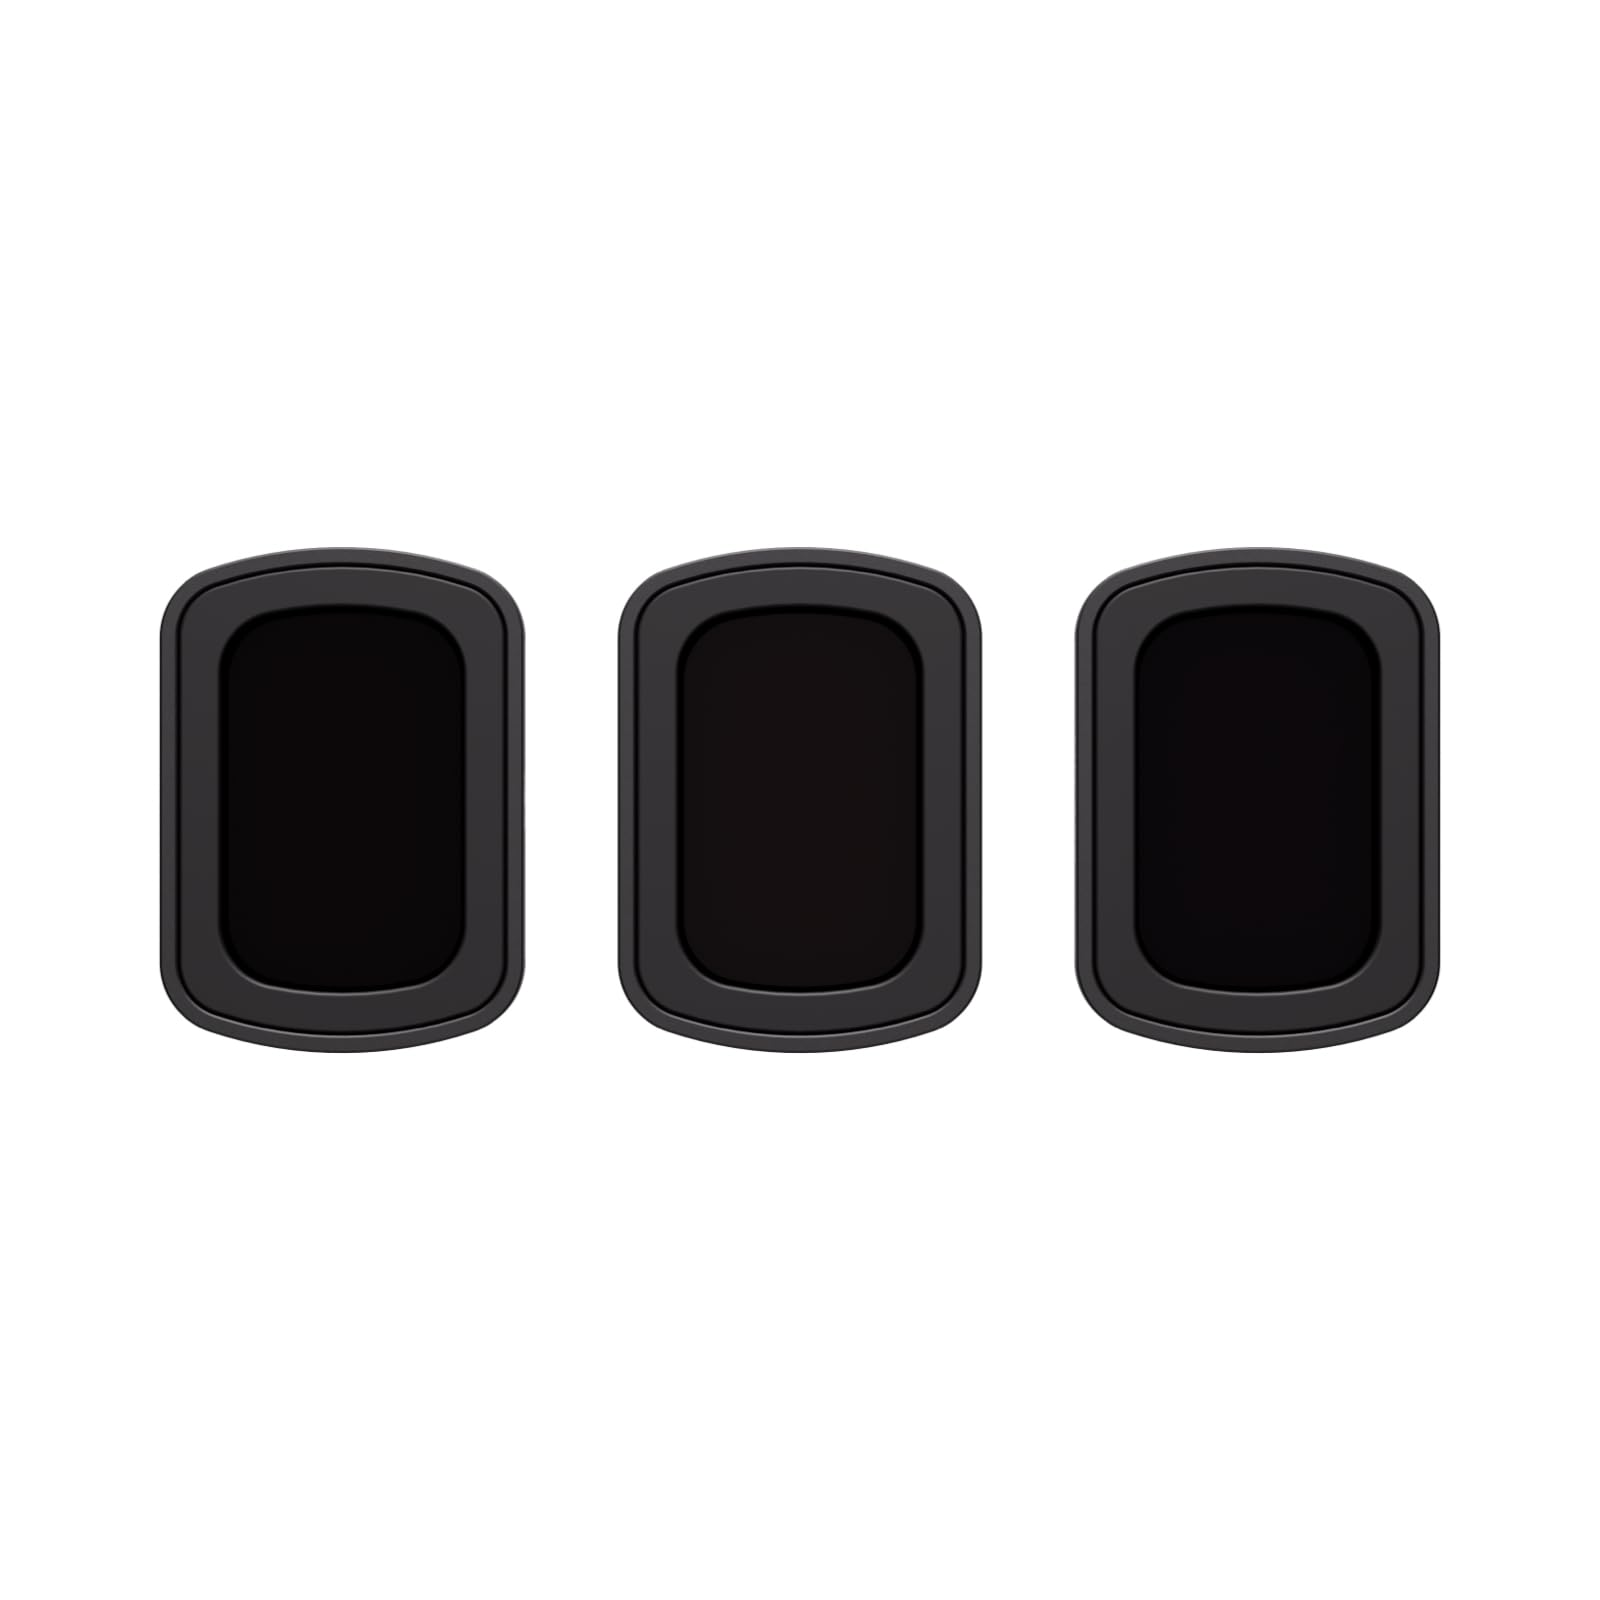 Osmo Pocket 3 Magnetic ND Filters Set, Compatibility: Osmo Pocket 3